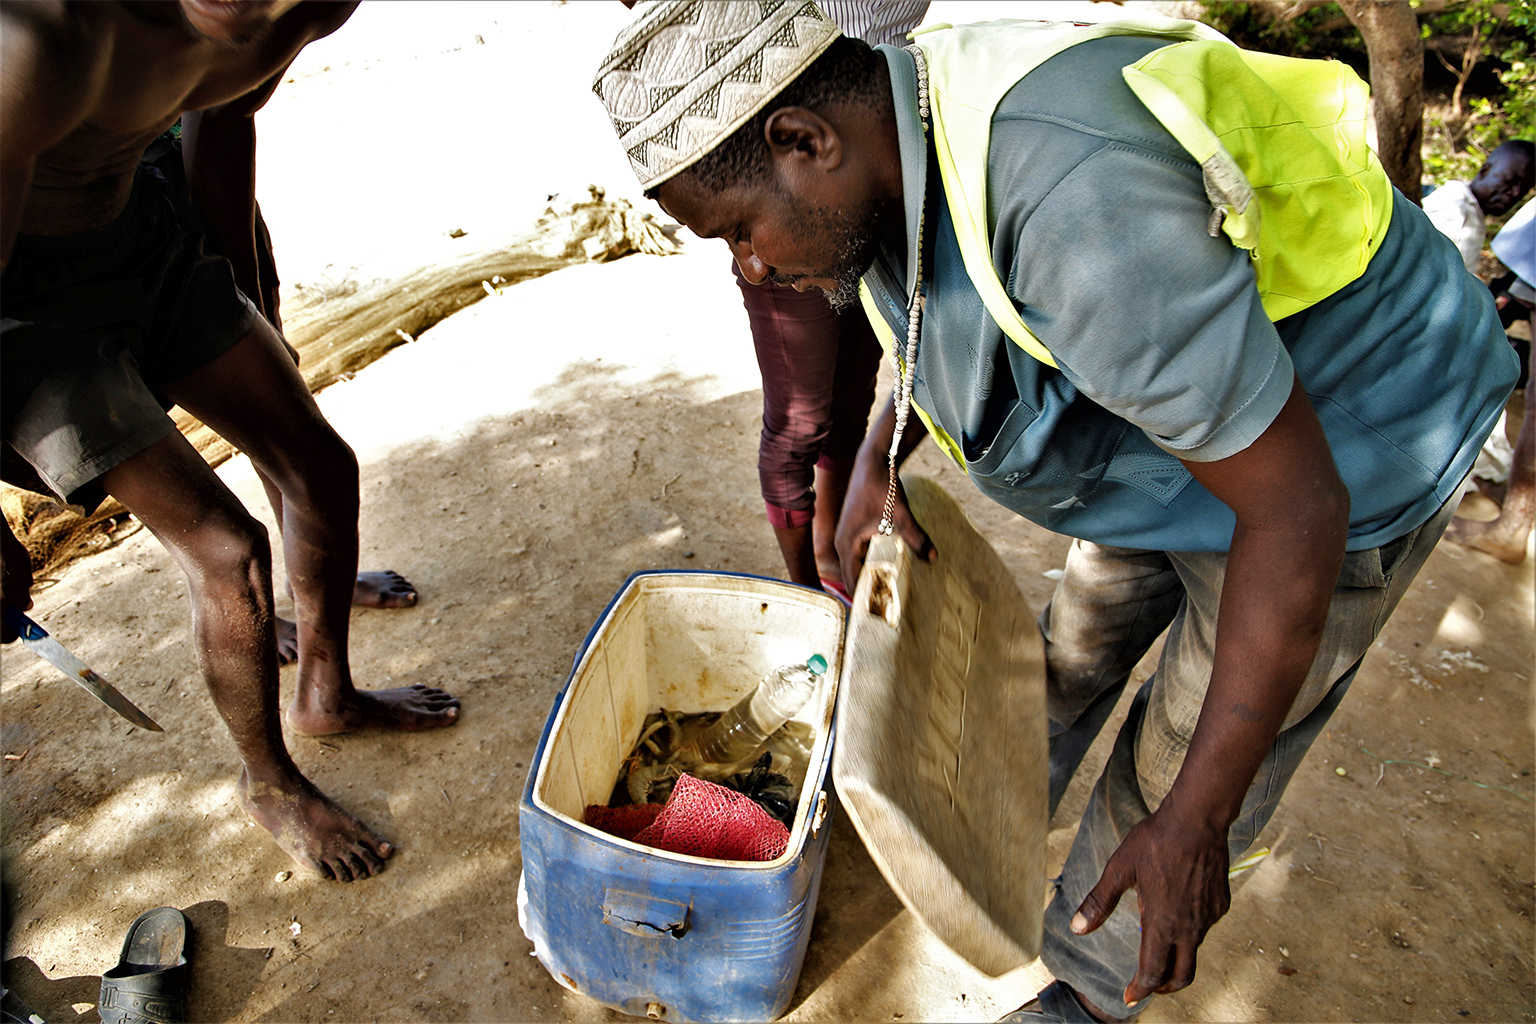 Hafidh Wanje, a fish trader and beach management official in the village of Gongoni, shows the fish he bought from fishermen.